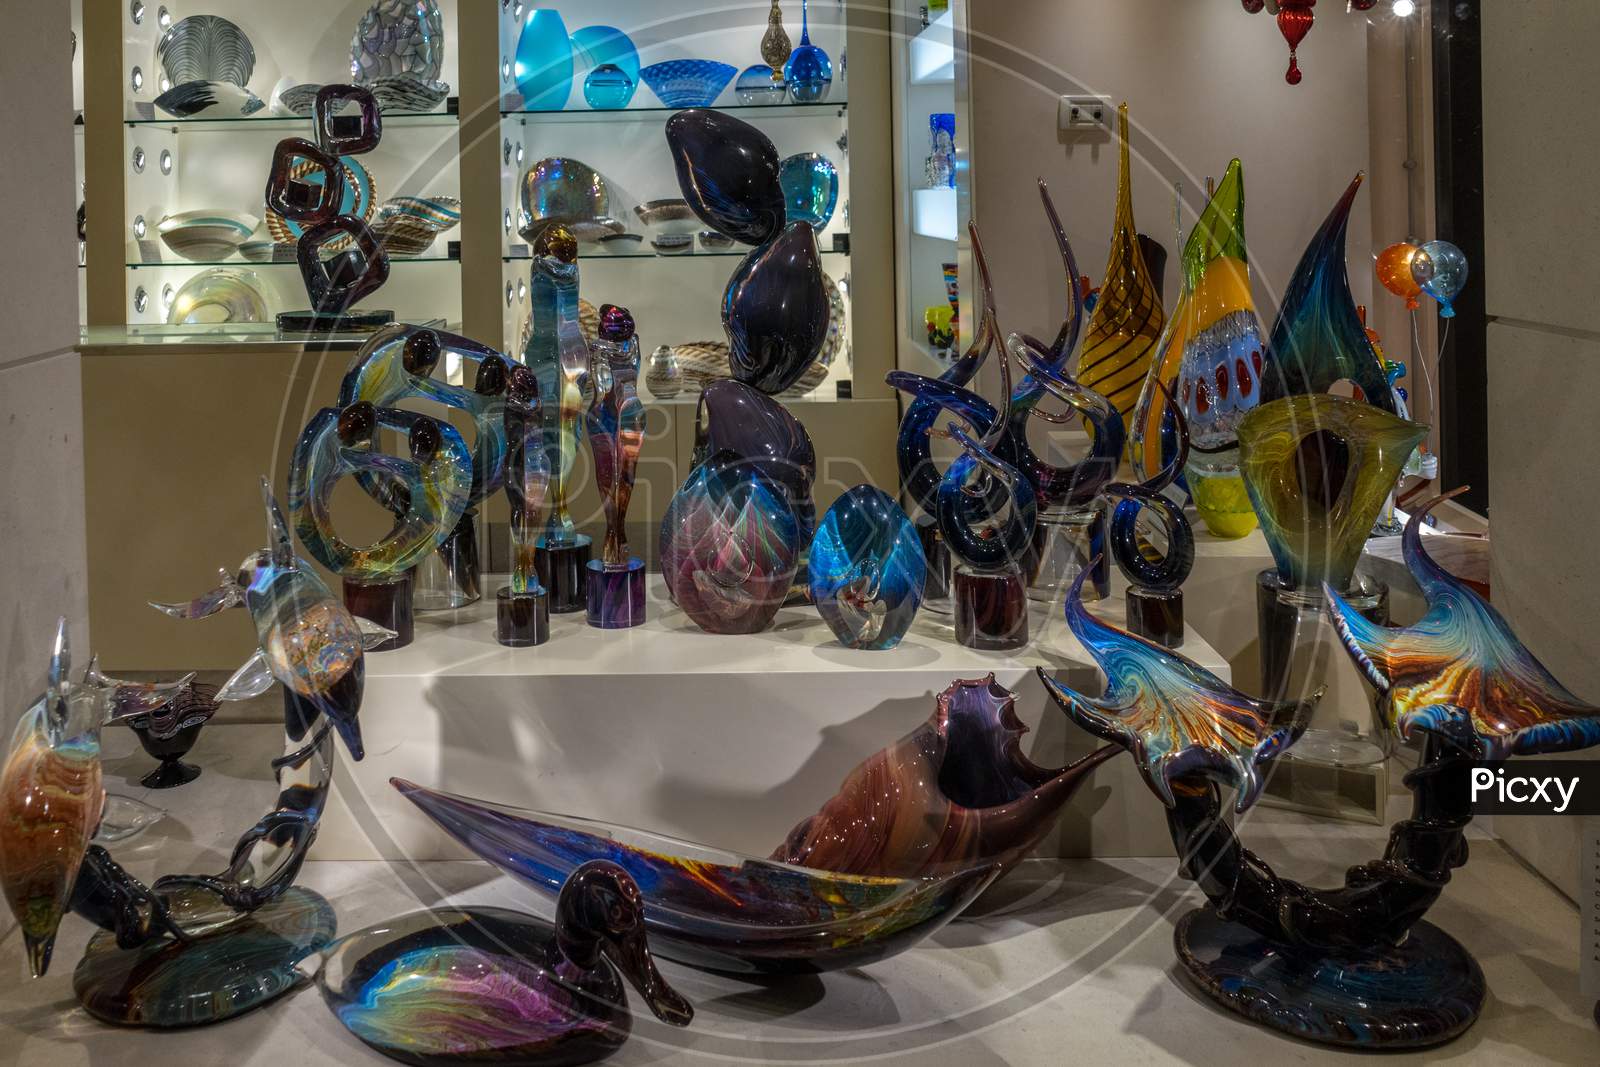 Venice, Italy - 30 June 2018: Colorful Glass Artifacts On Display In A Shop In Venice, Italy